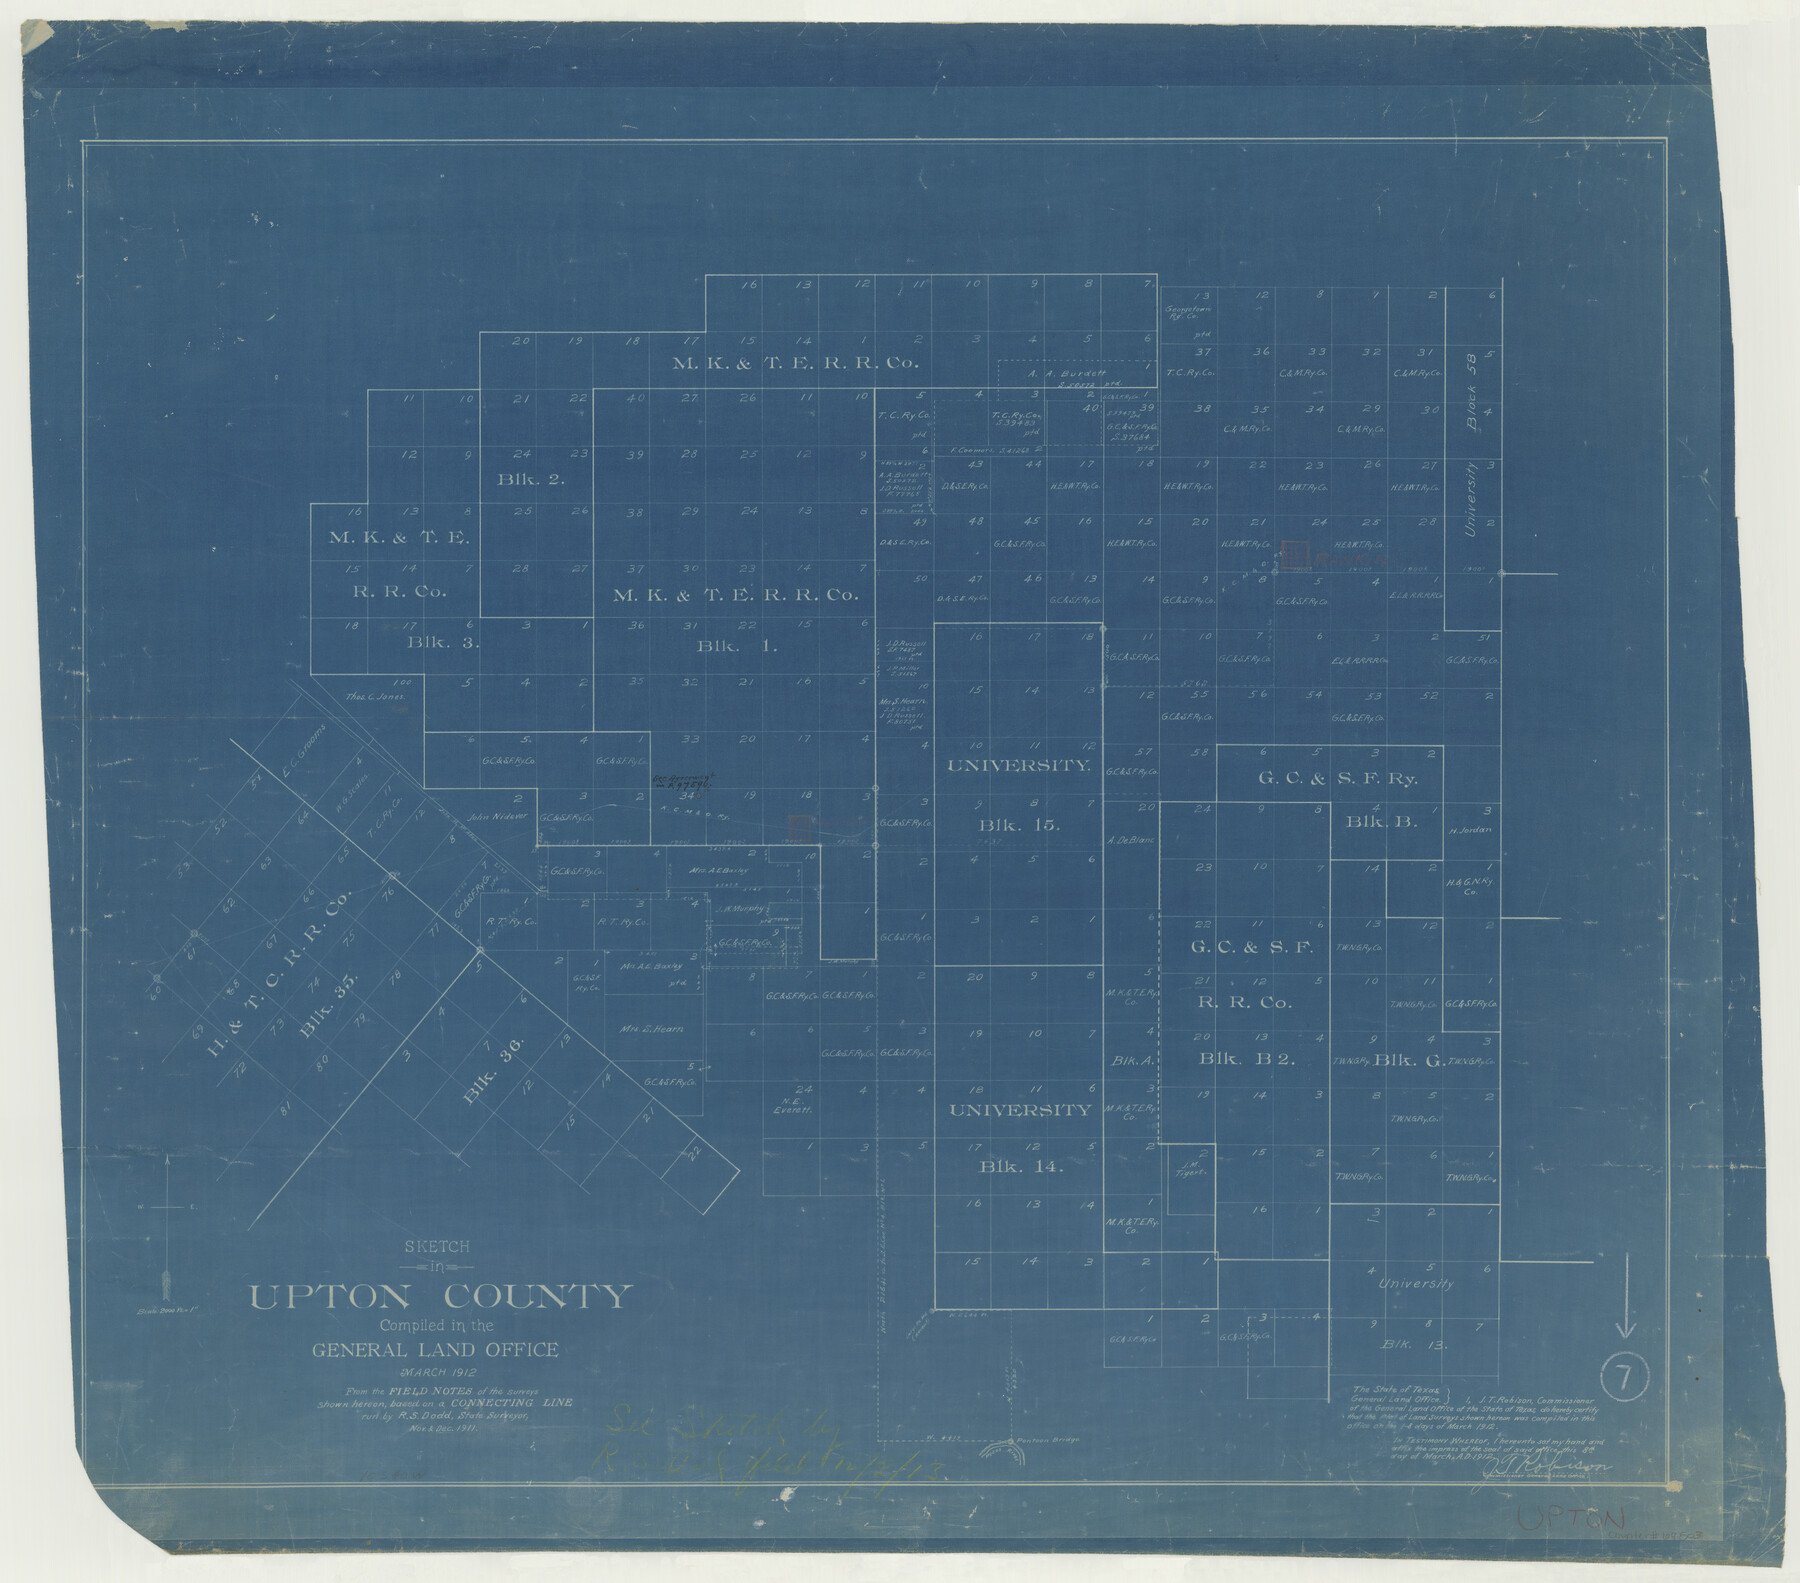 69503, Upton County Working Sketch 7, General Map Collection